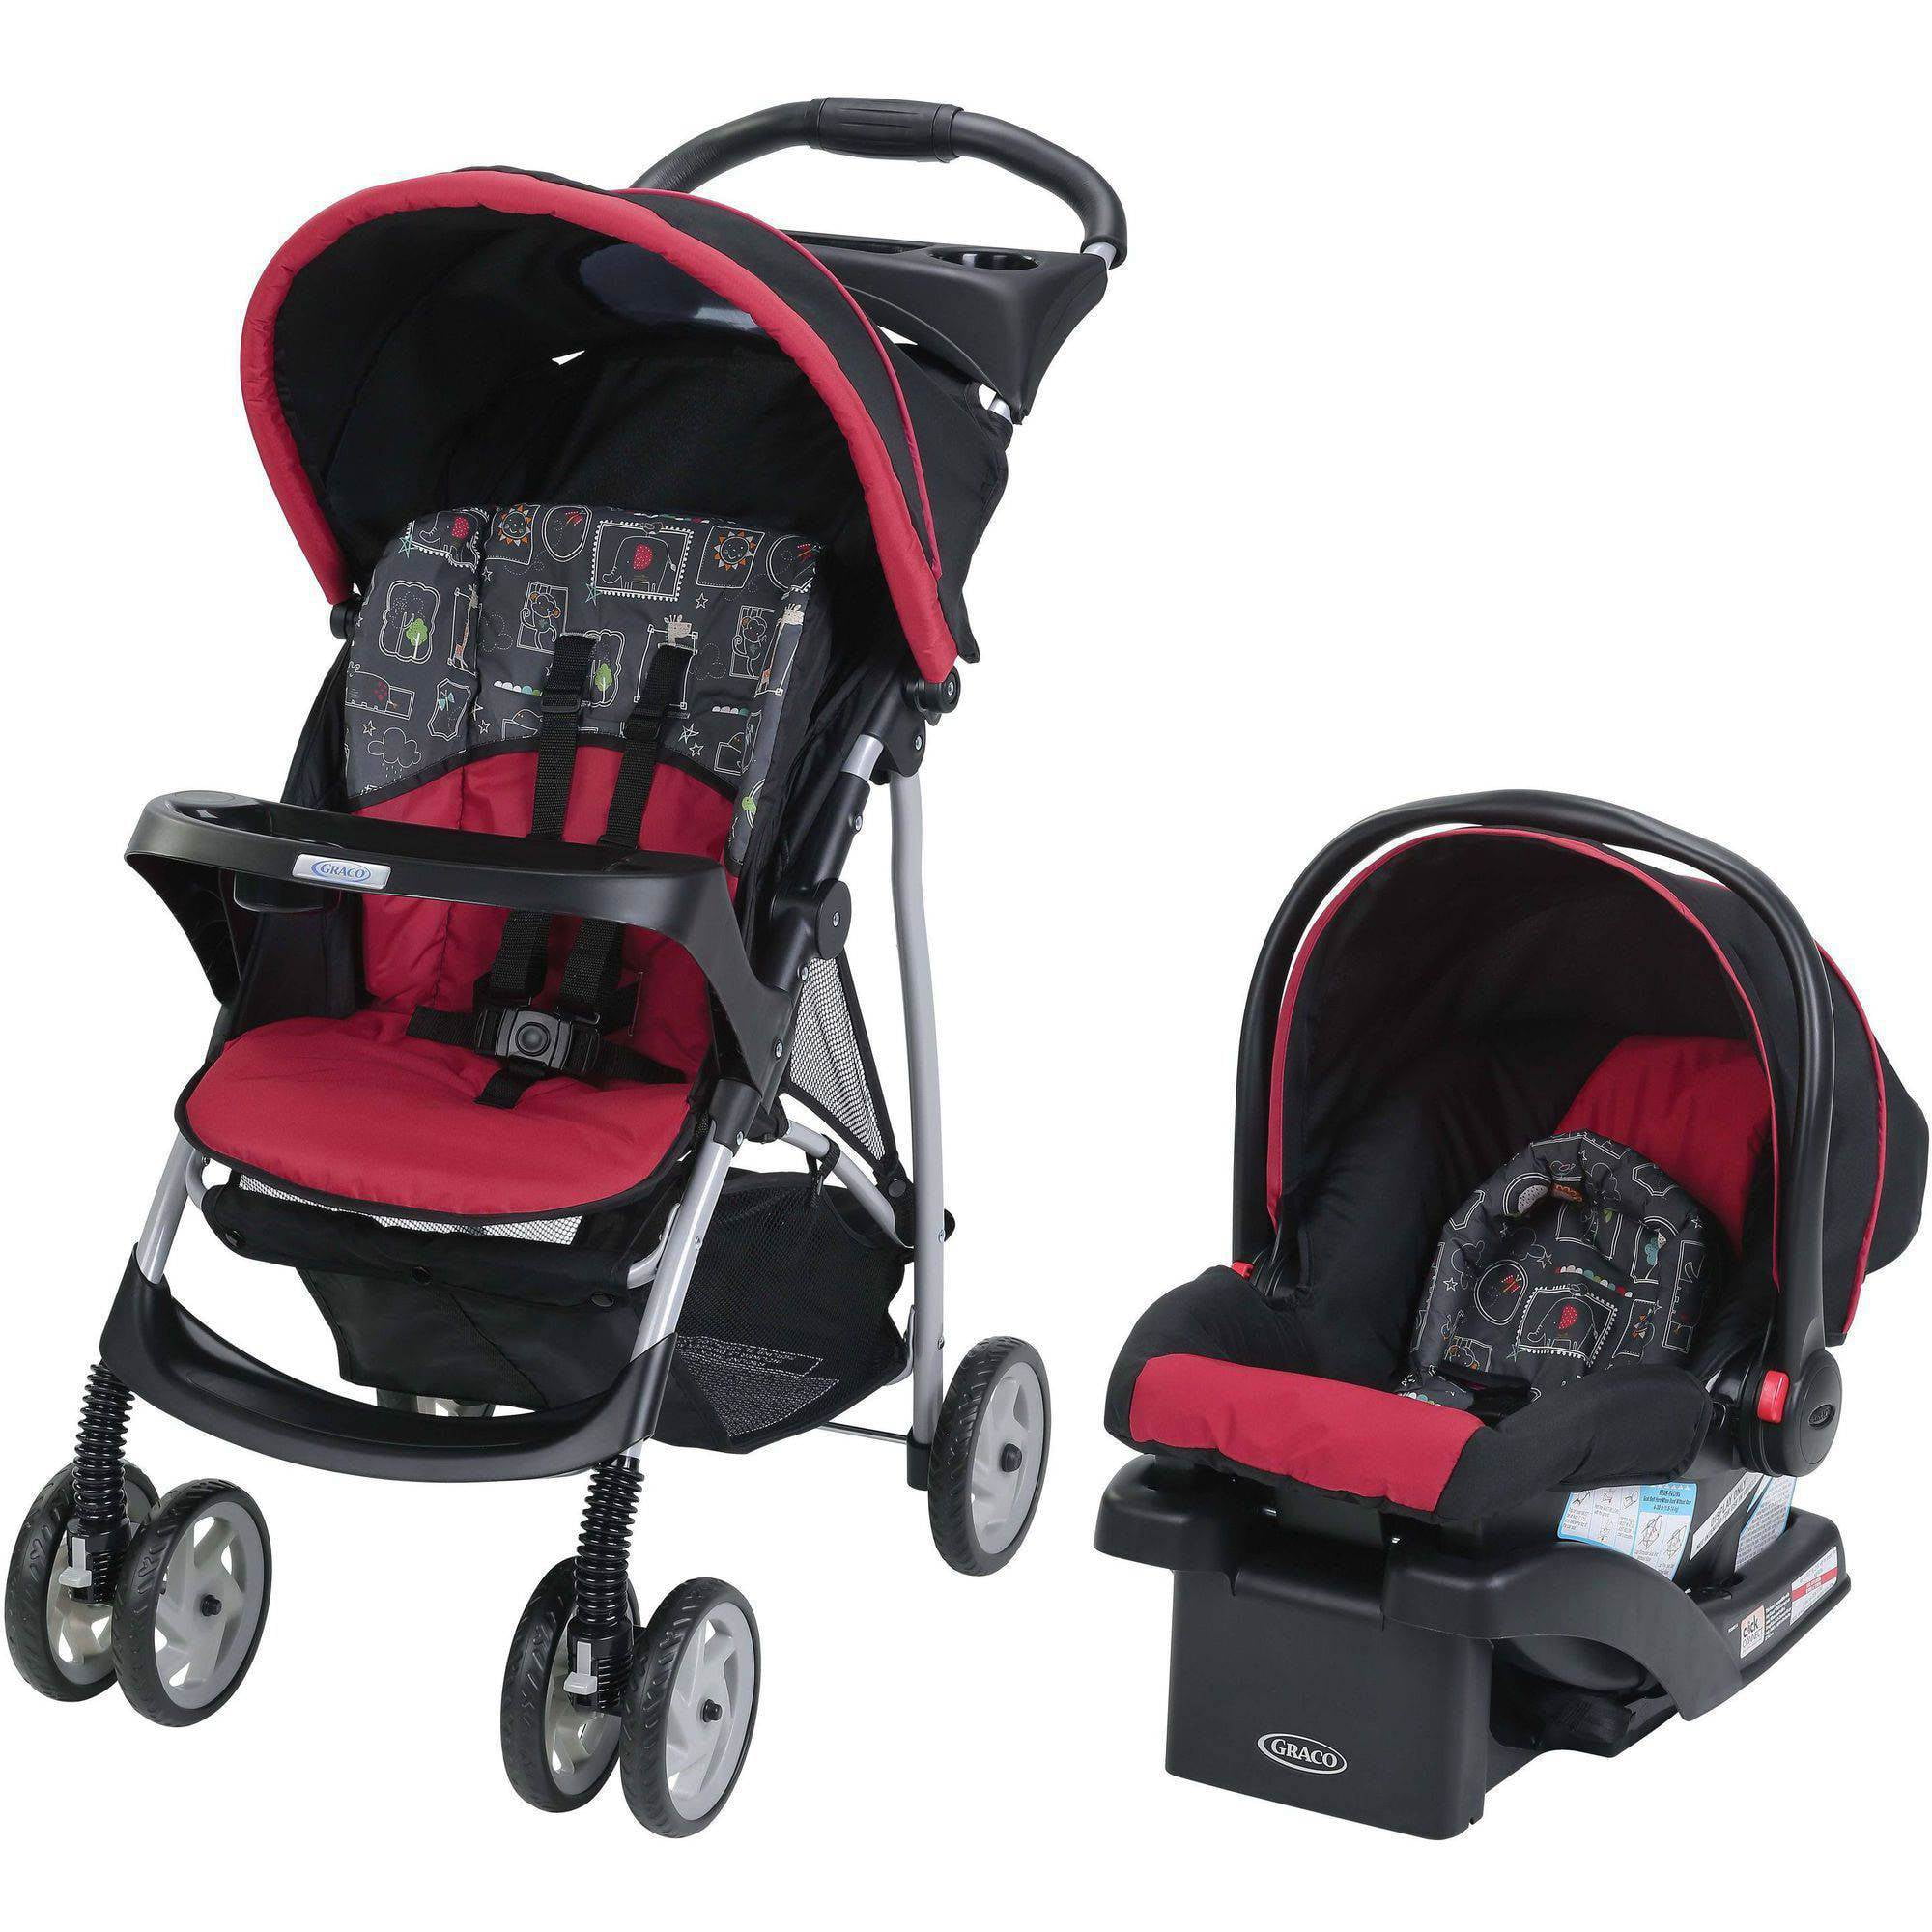 red and black car seat and stroller